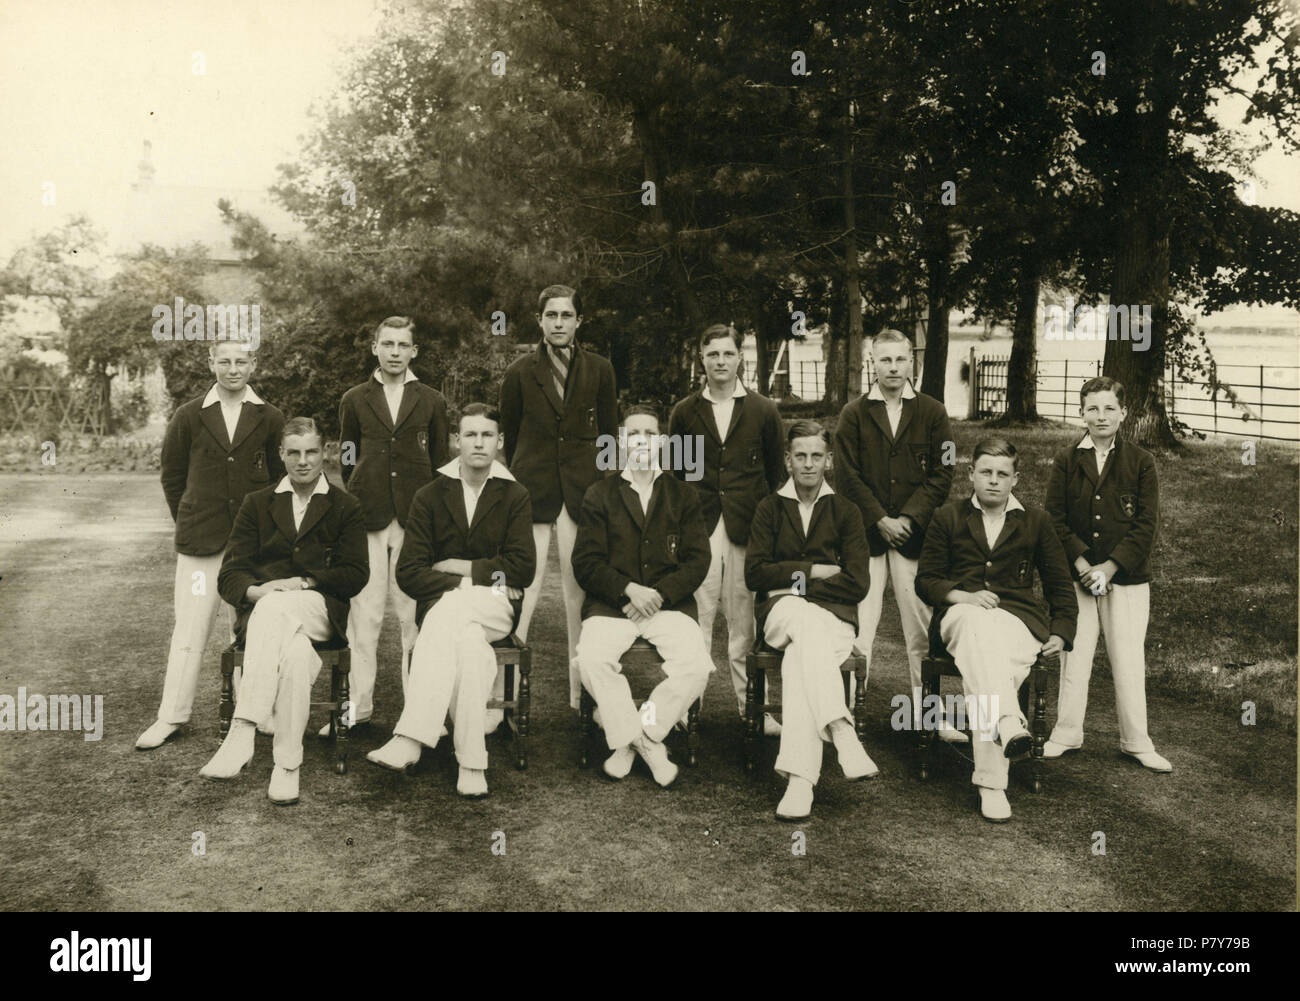 Group portrait of cricket team aged perhaps 16-18yrs at Herne Bay College, Herne Bay, Kent, England. The portrait is larger than A4 size, mounted on a large card. At the top of the card it says 'Herne Bay College second team 1929' with the coat of arms showing the Kentish white horse symbol, the Herne Bay heron symbol and an open book. The motto is Delectando Pariterque monendo. Below the photo on the card is the list of names. Back row, left to right: D.M. Ball, W.H. Bailey, C. Alonso, B. Clemow, K.A. Lundberg, J.D. Turner. Front row, left to right; A.D. Newbury, A.J.C. Bell, L.G.L. Cooke, J. Stock Photo